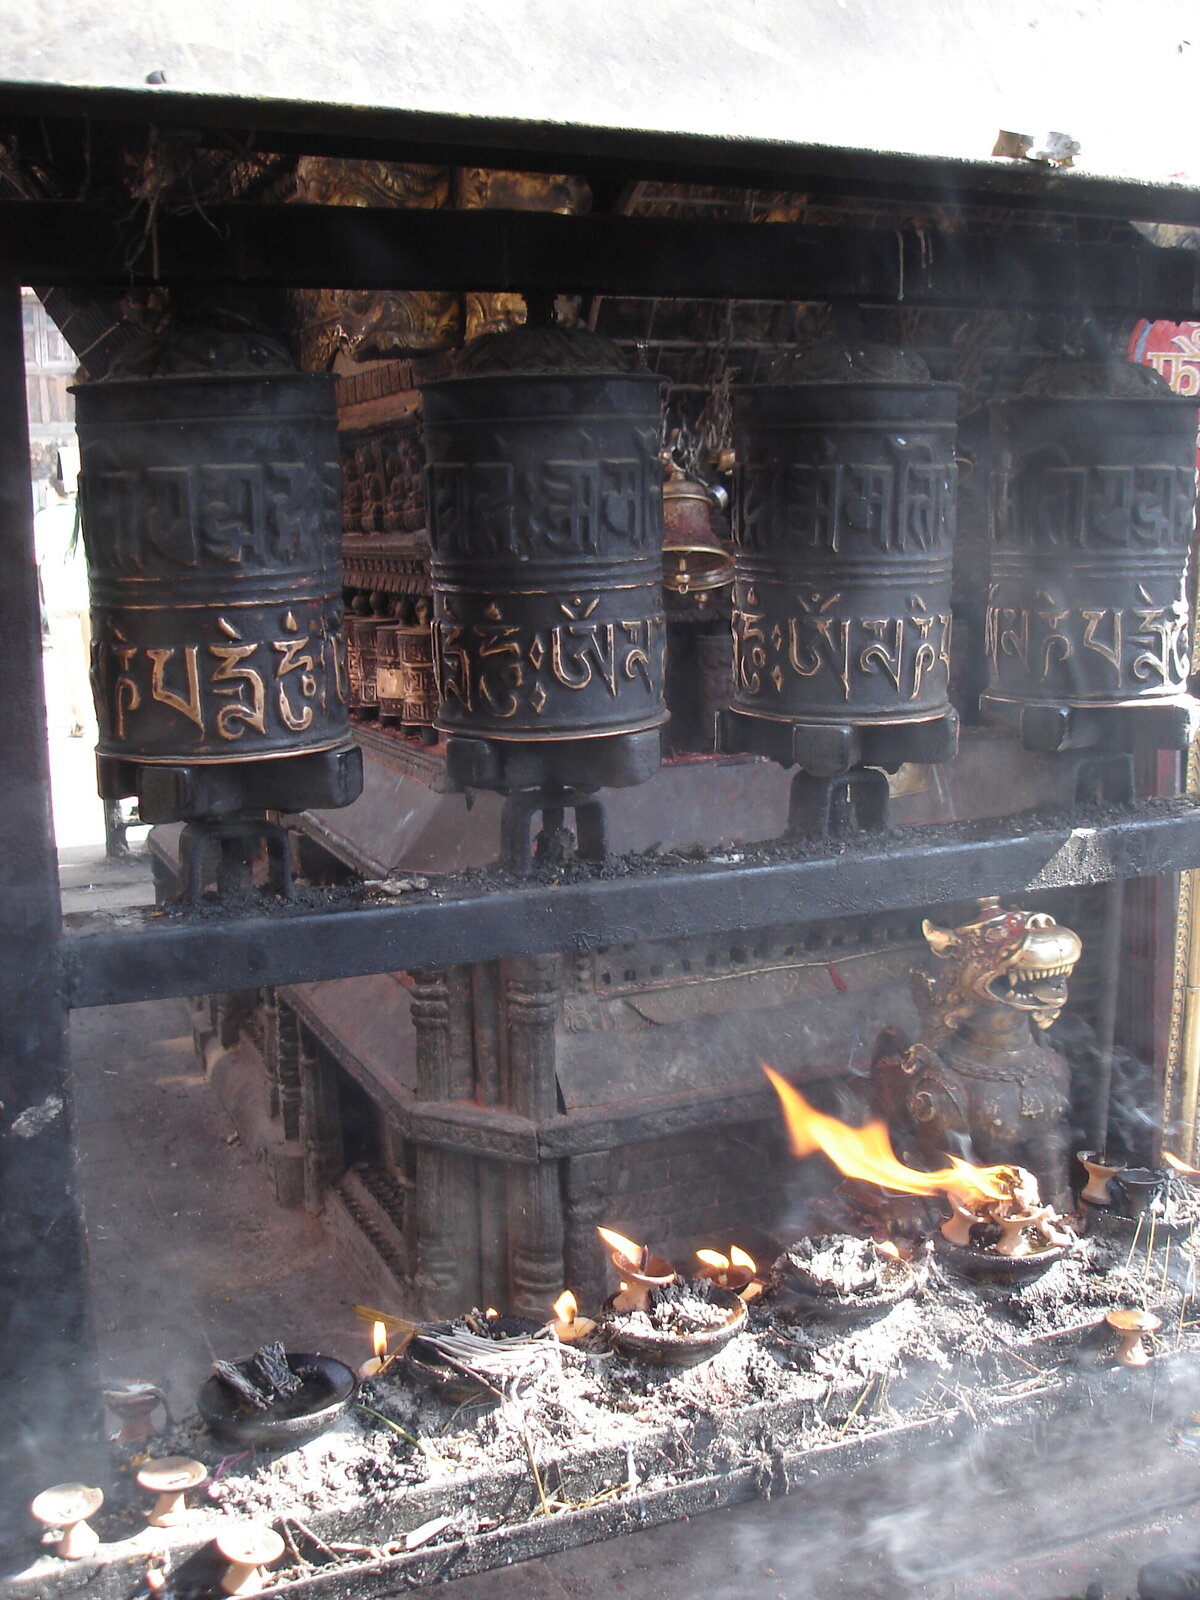 Prayer wheels, butter lamps and burning incense